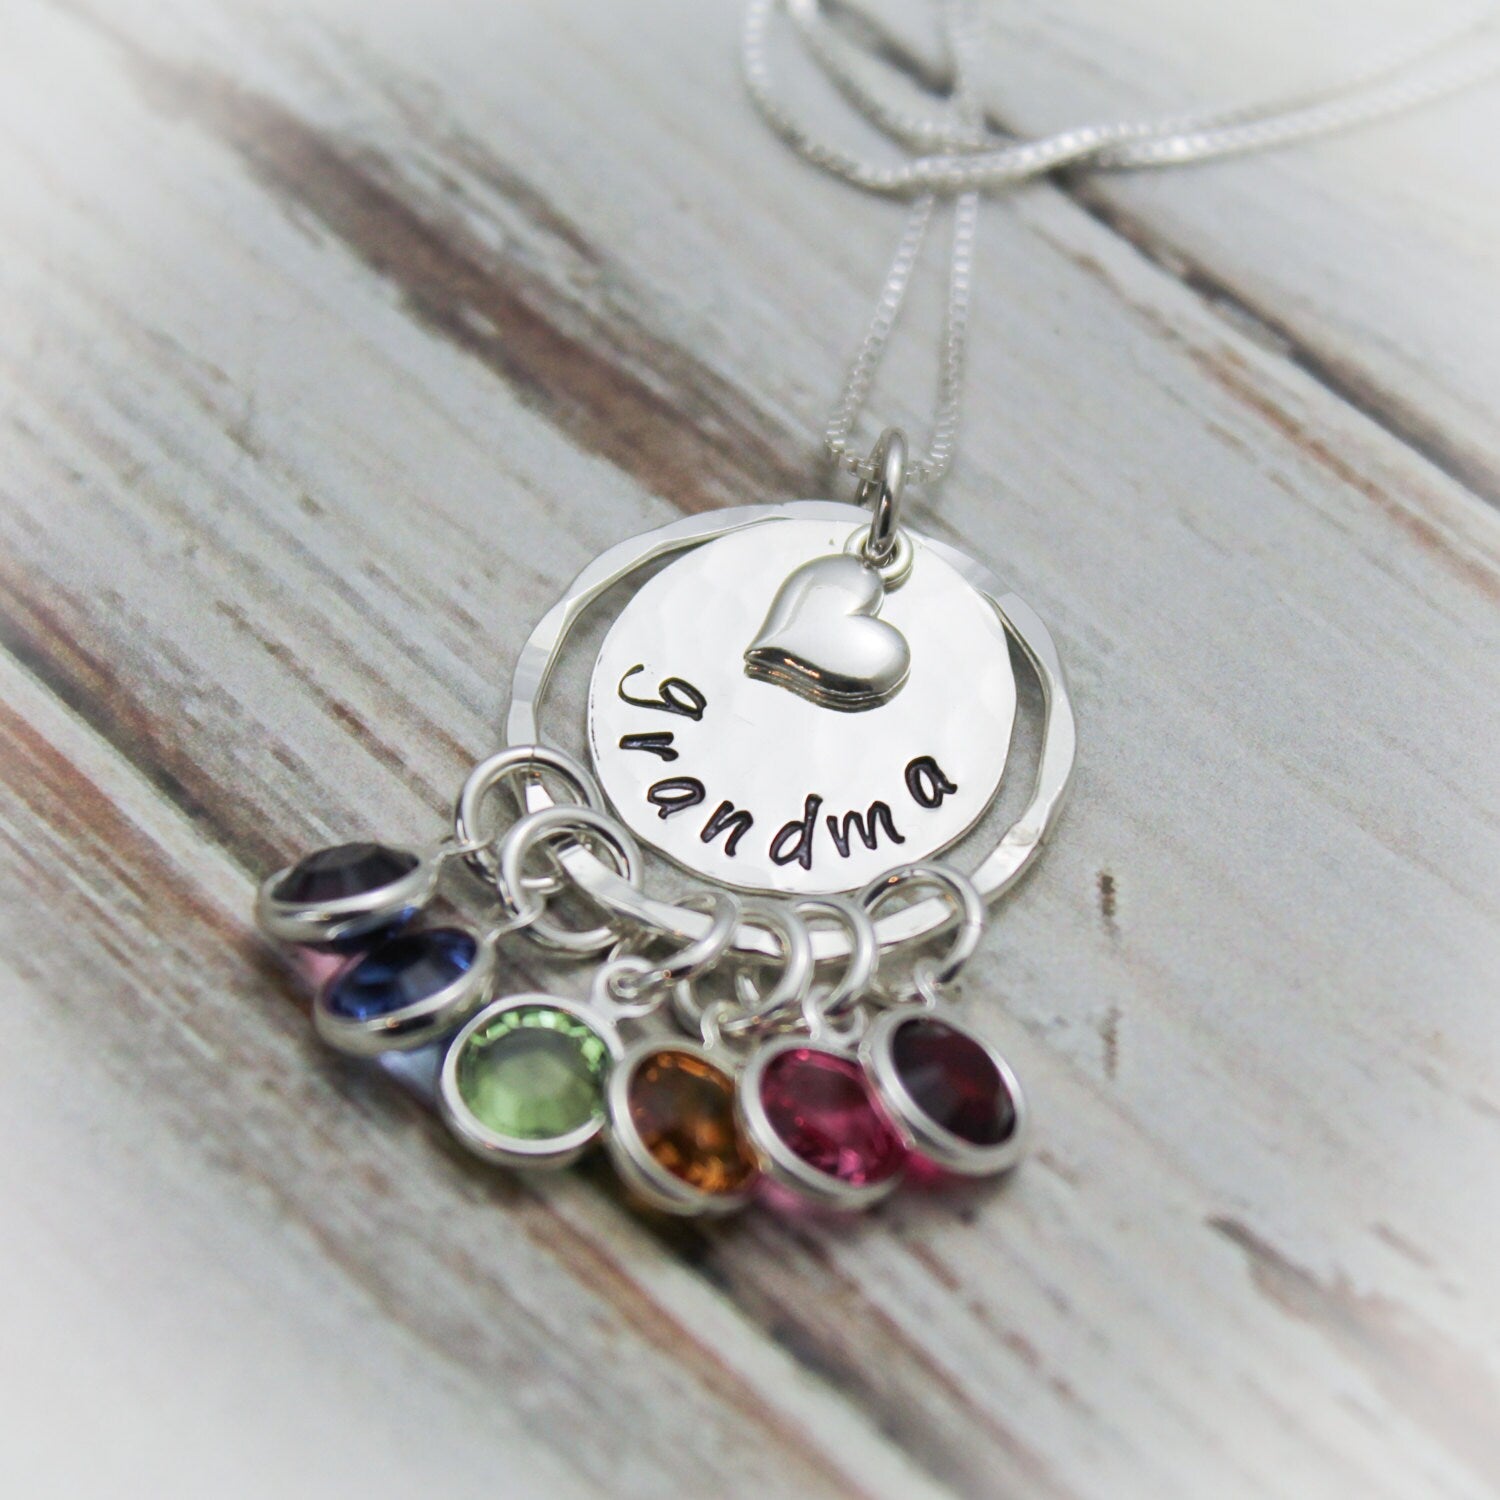 Grandma Necklace, Grandmother Necklace, Birthstone Necklace, Grandchildren Necklace, Hand Stamped Personalized, Mother's Day Gift, Silver